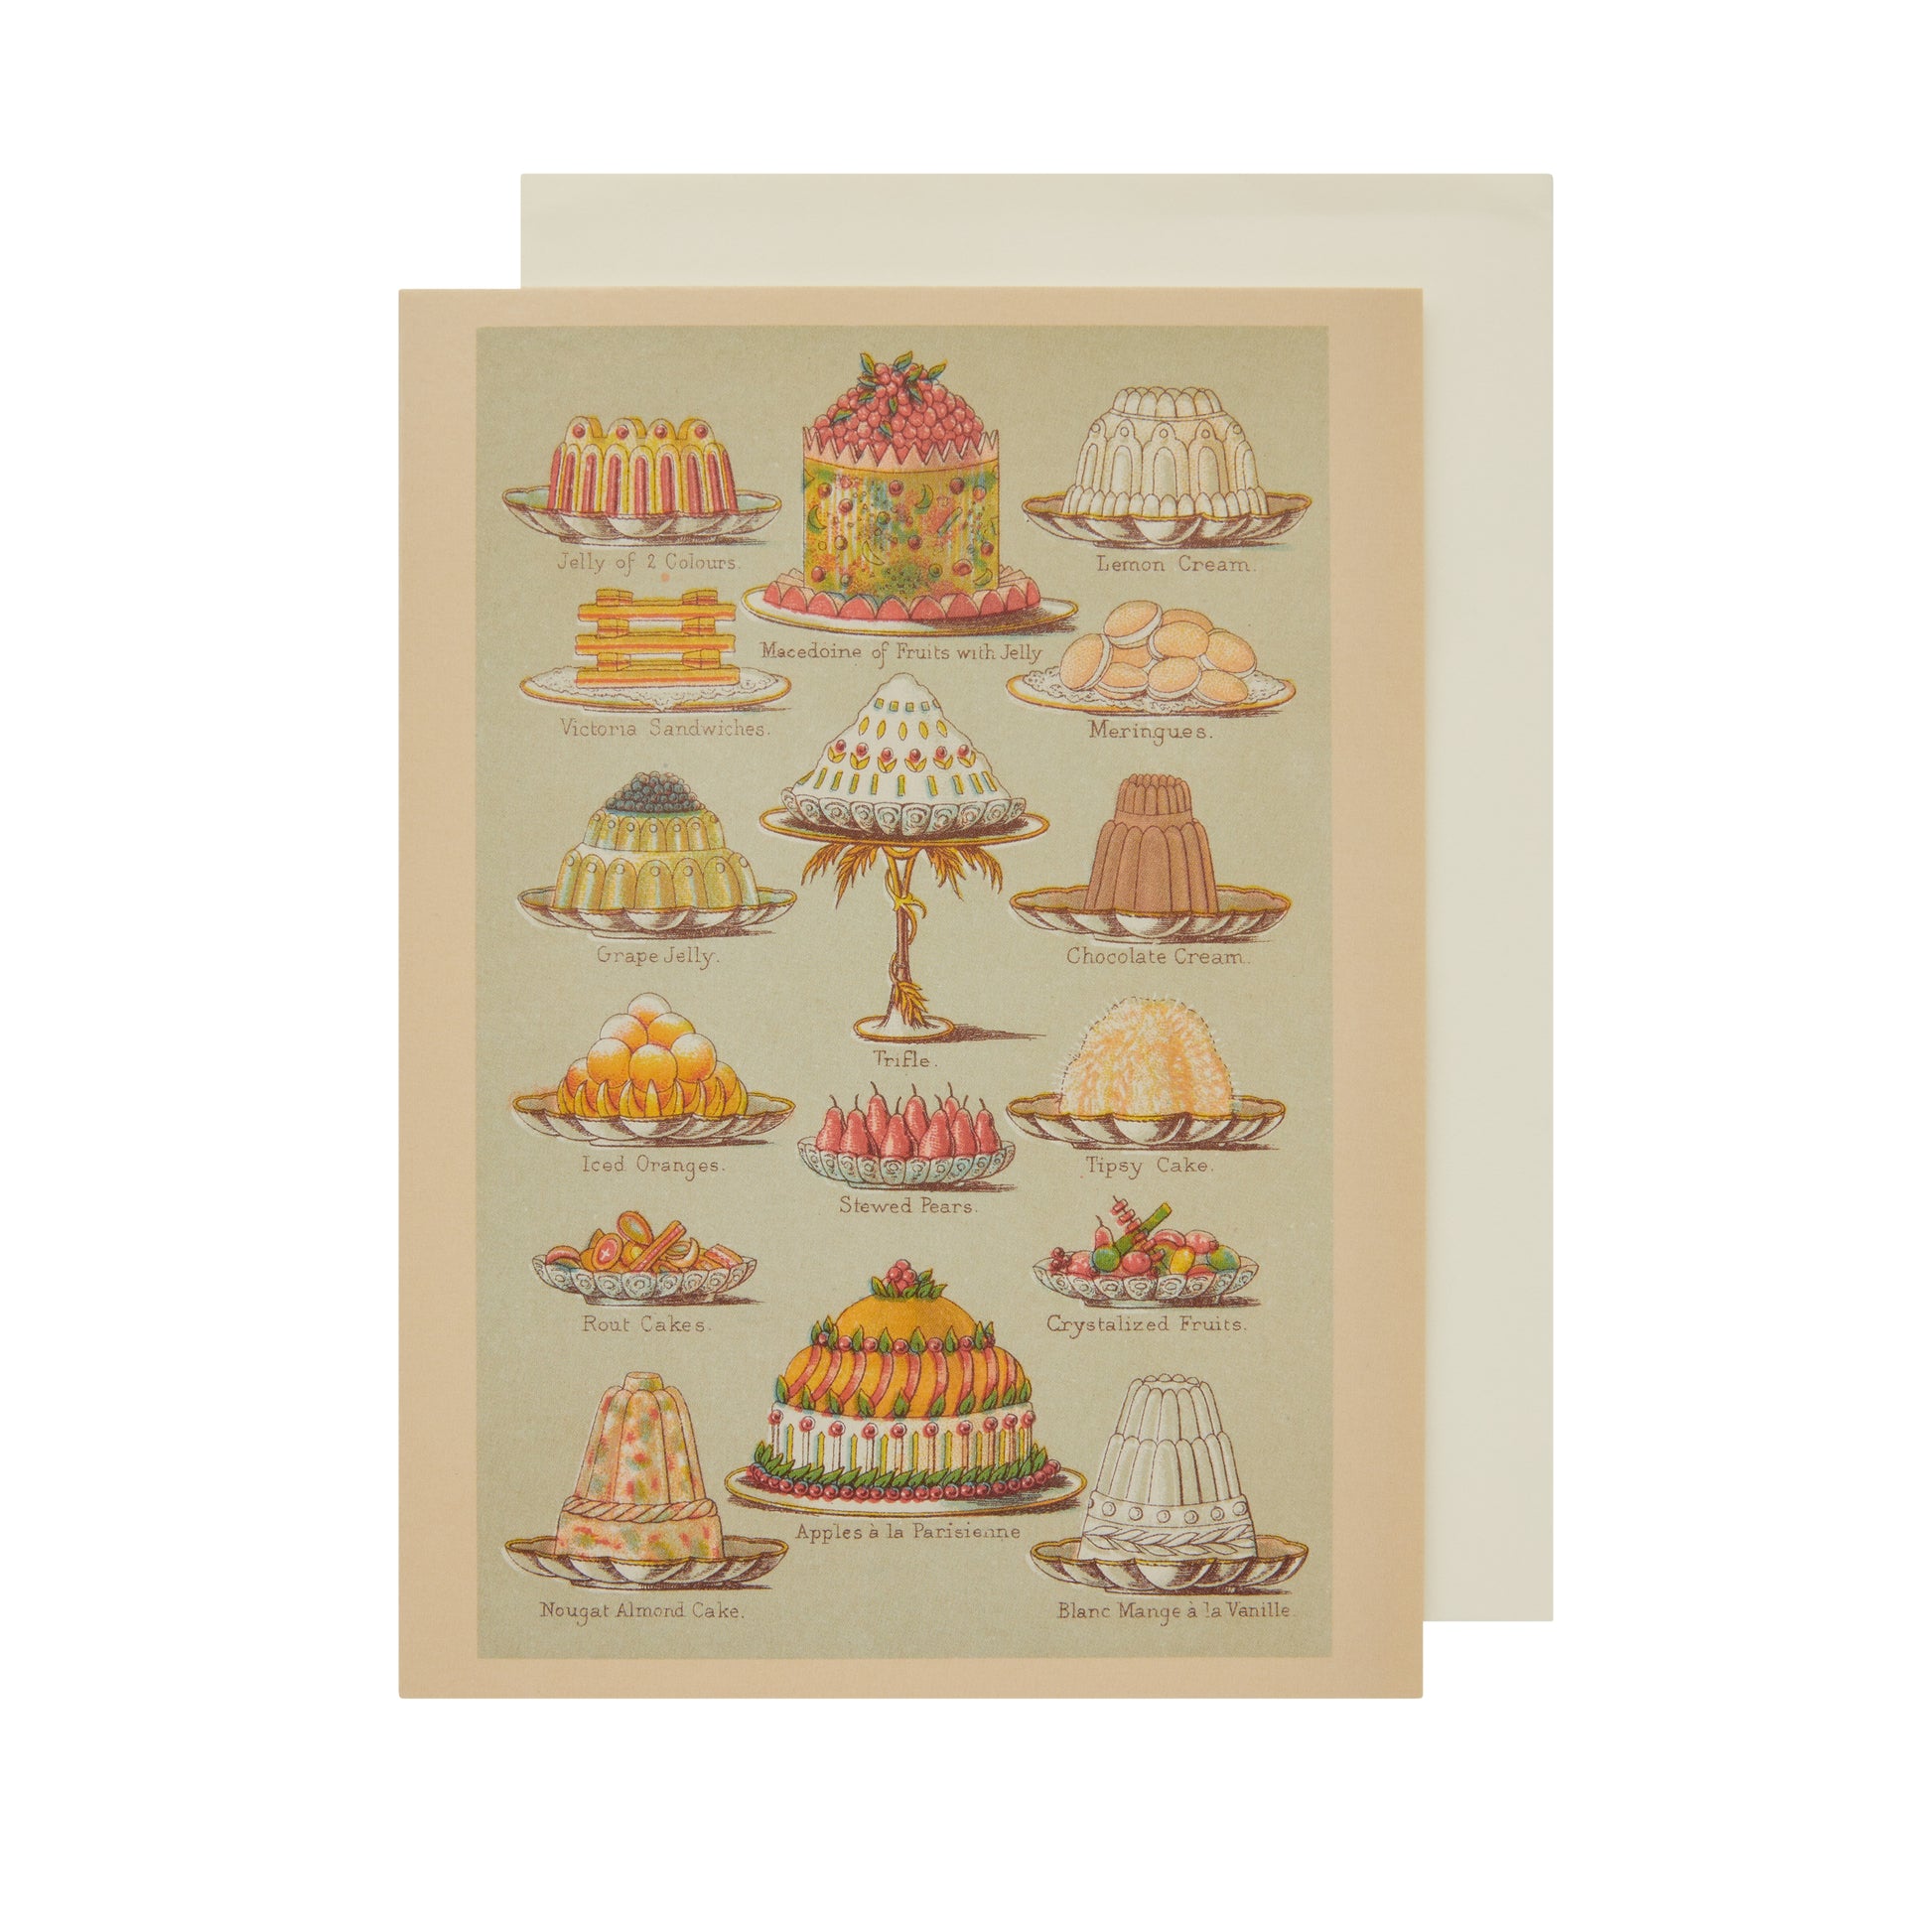 Greeting card, portrait format, with illustrations of creams and jellies from Mrs Beeton's Book of Household Management. From the collection of Cambridge University Library, brought to you by CuratingCambridge.com